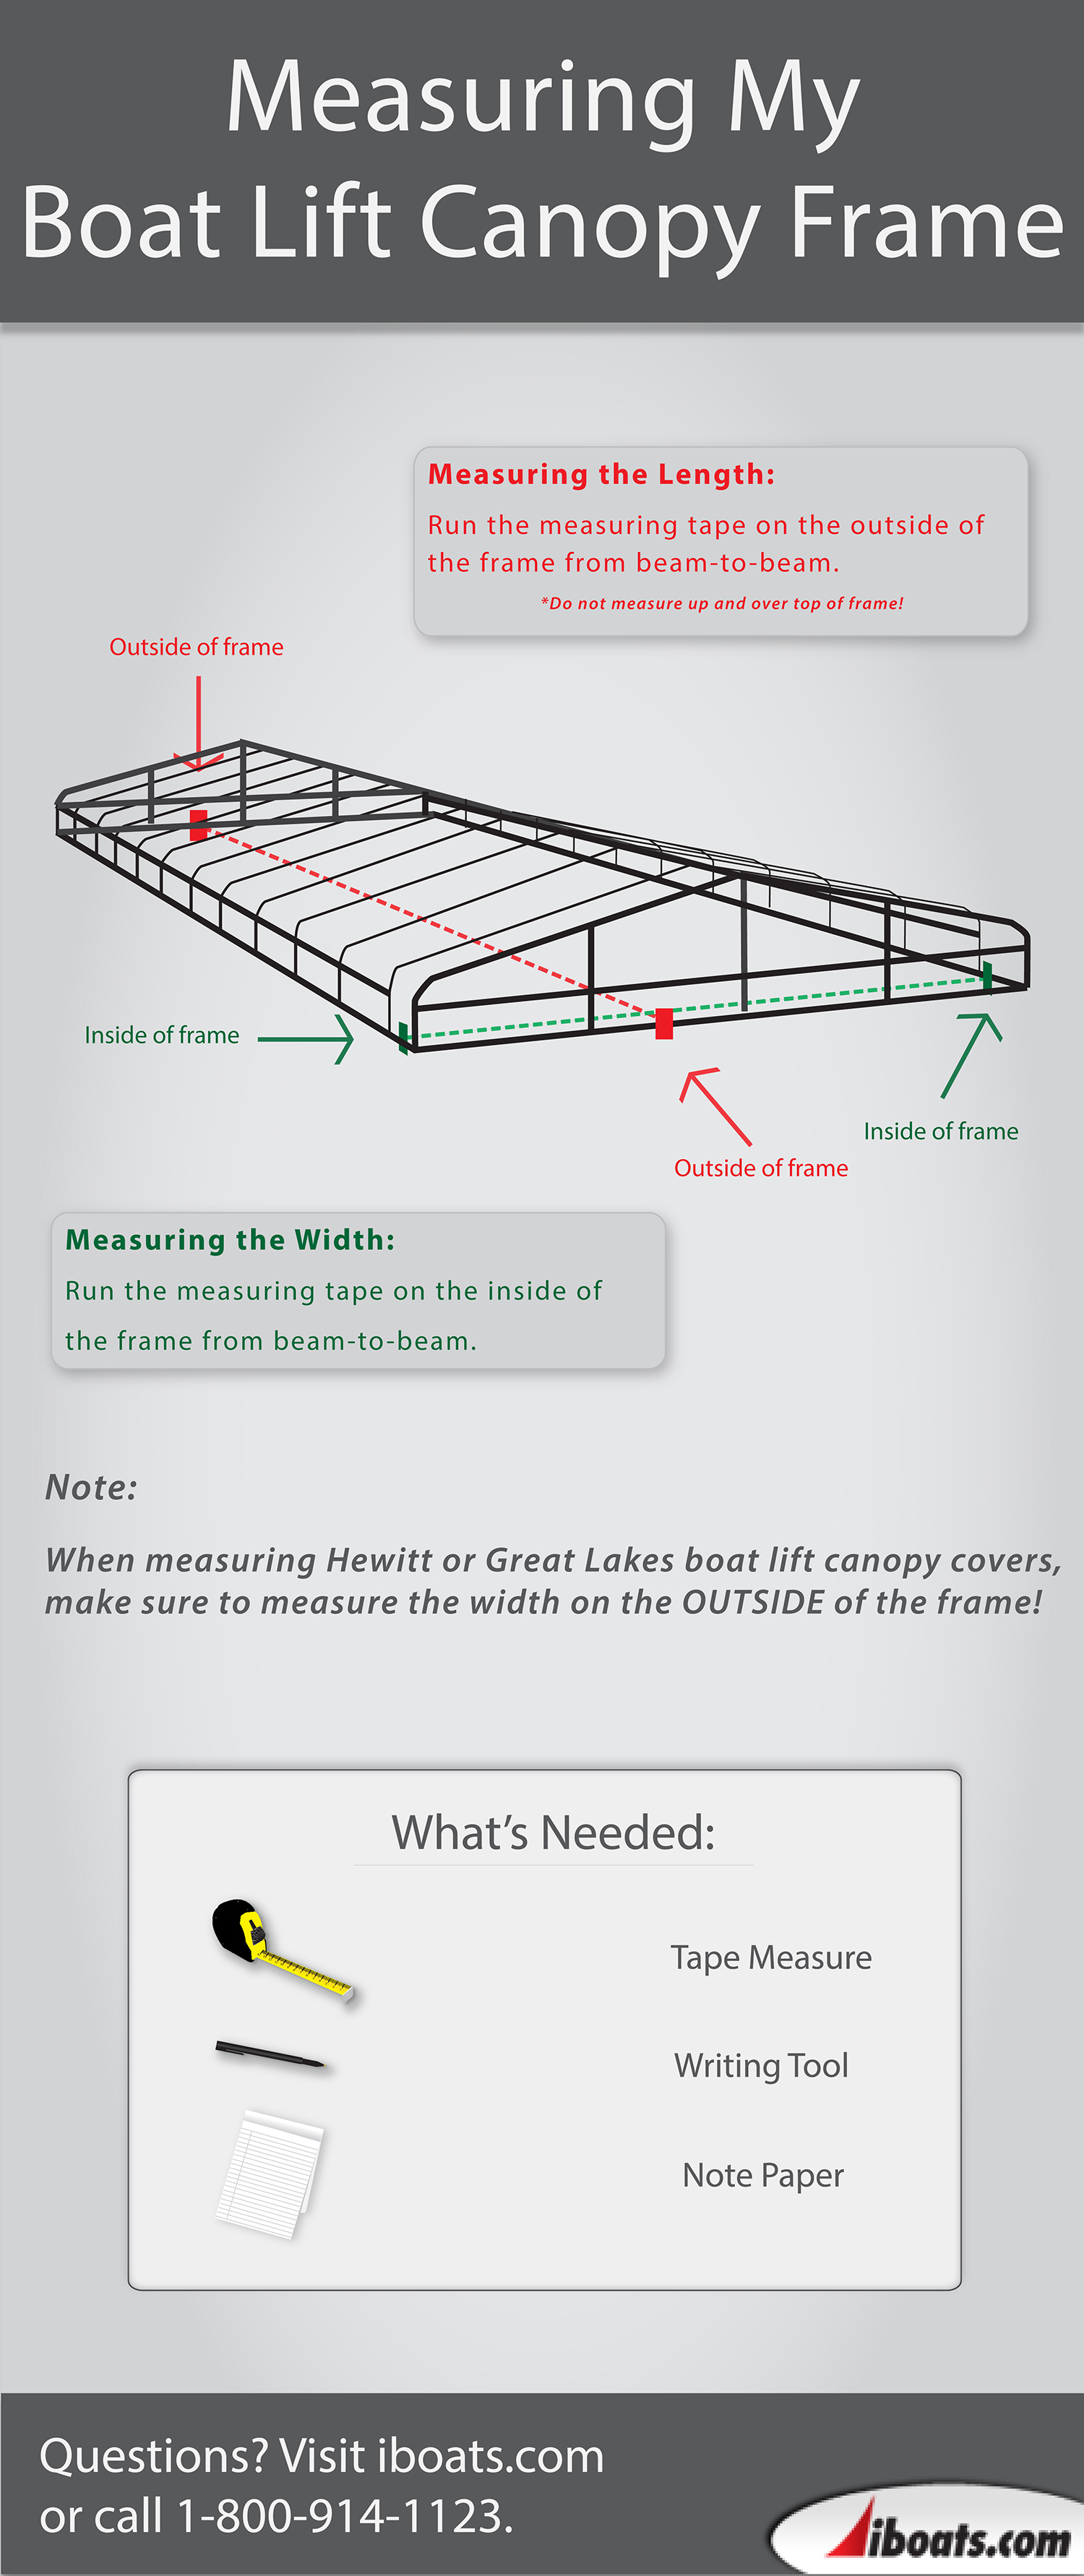 Infographic on how to measure a boat lift canopy frame